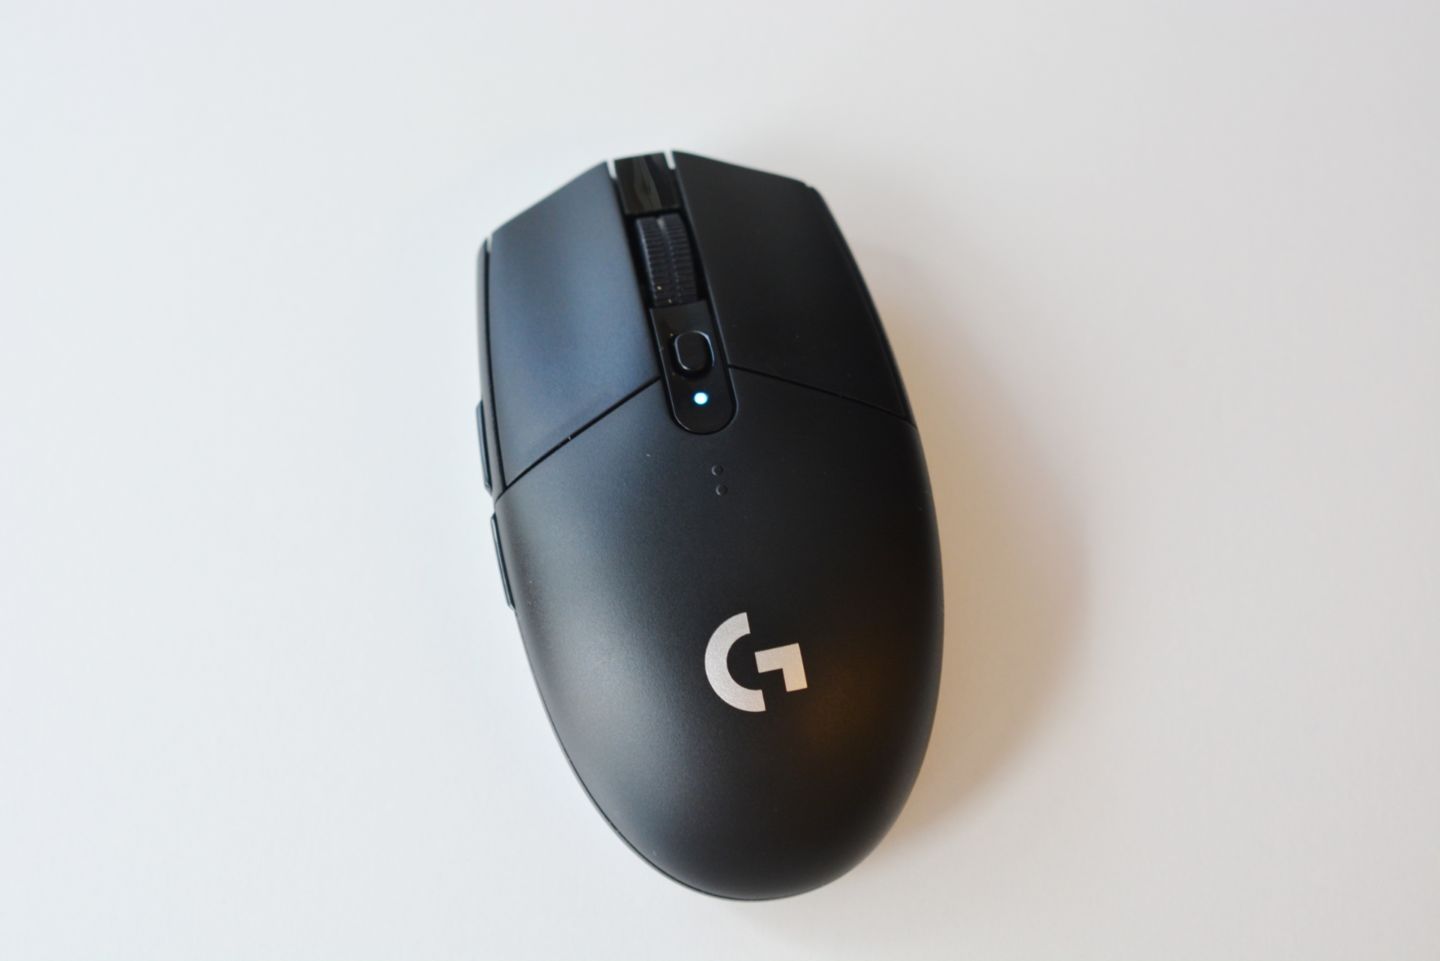 The Logitech G305 Lightspeed wireless gaming mouse is down to £30